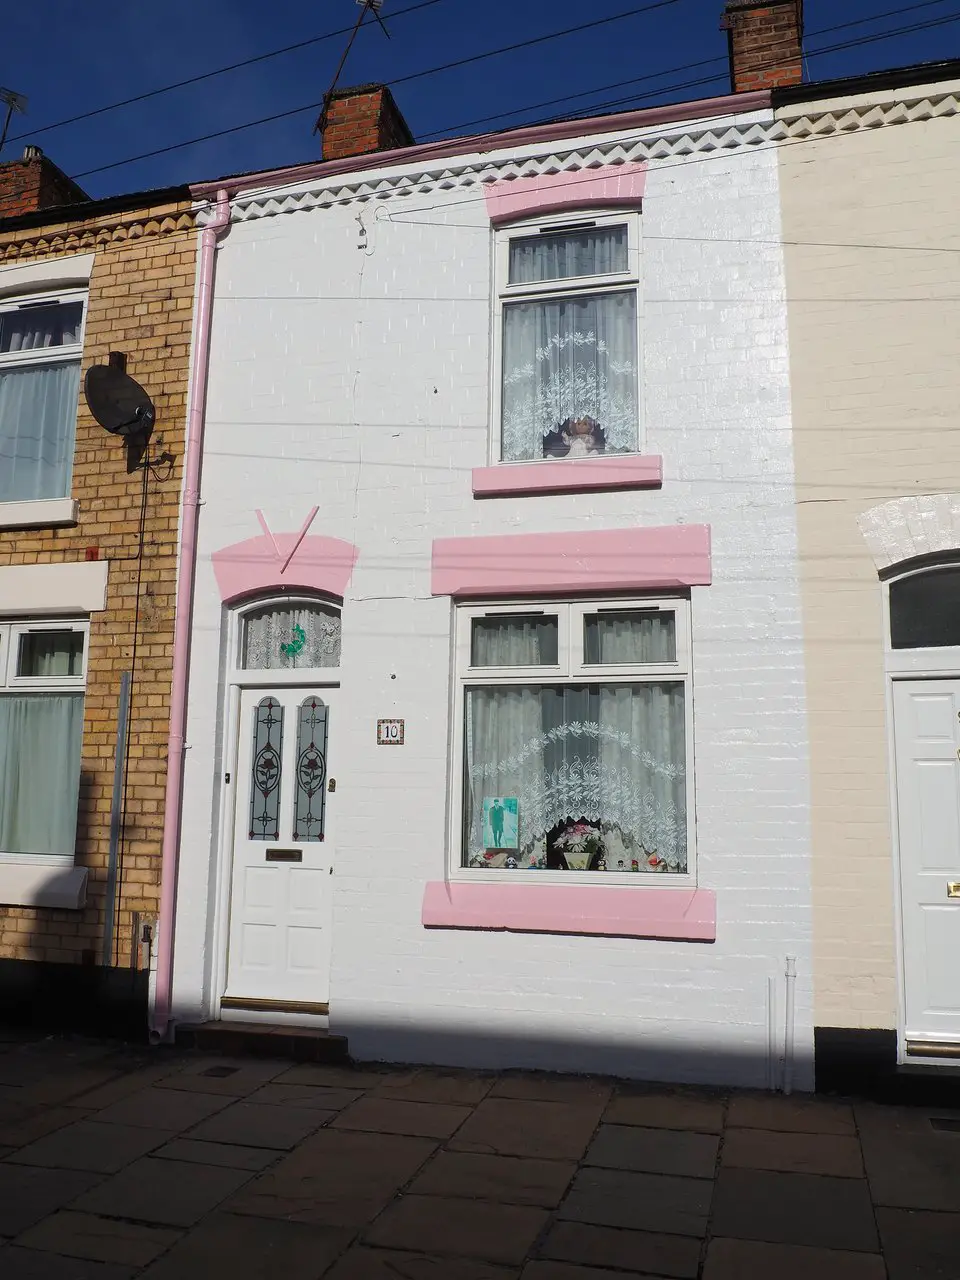 A pink and white terraced house at 10 Admiral Grove, which was Ringo Starr's Childhood Home